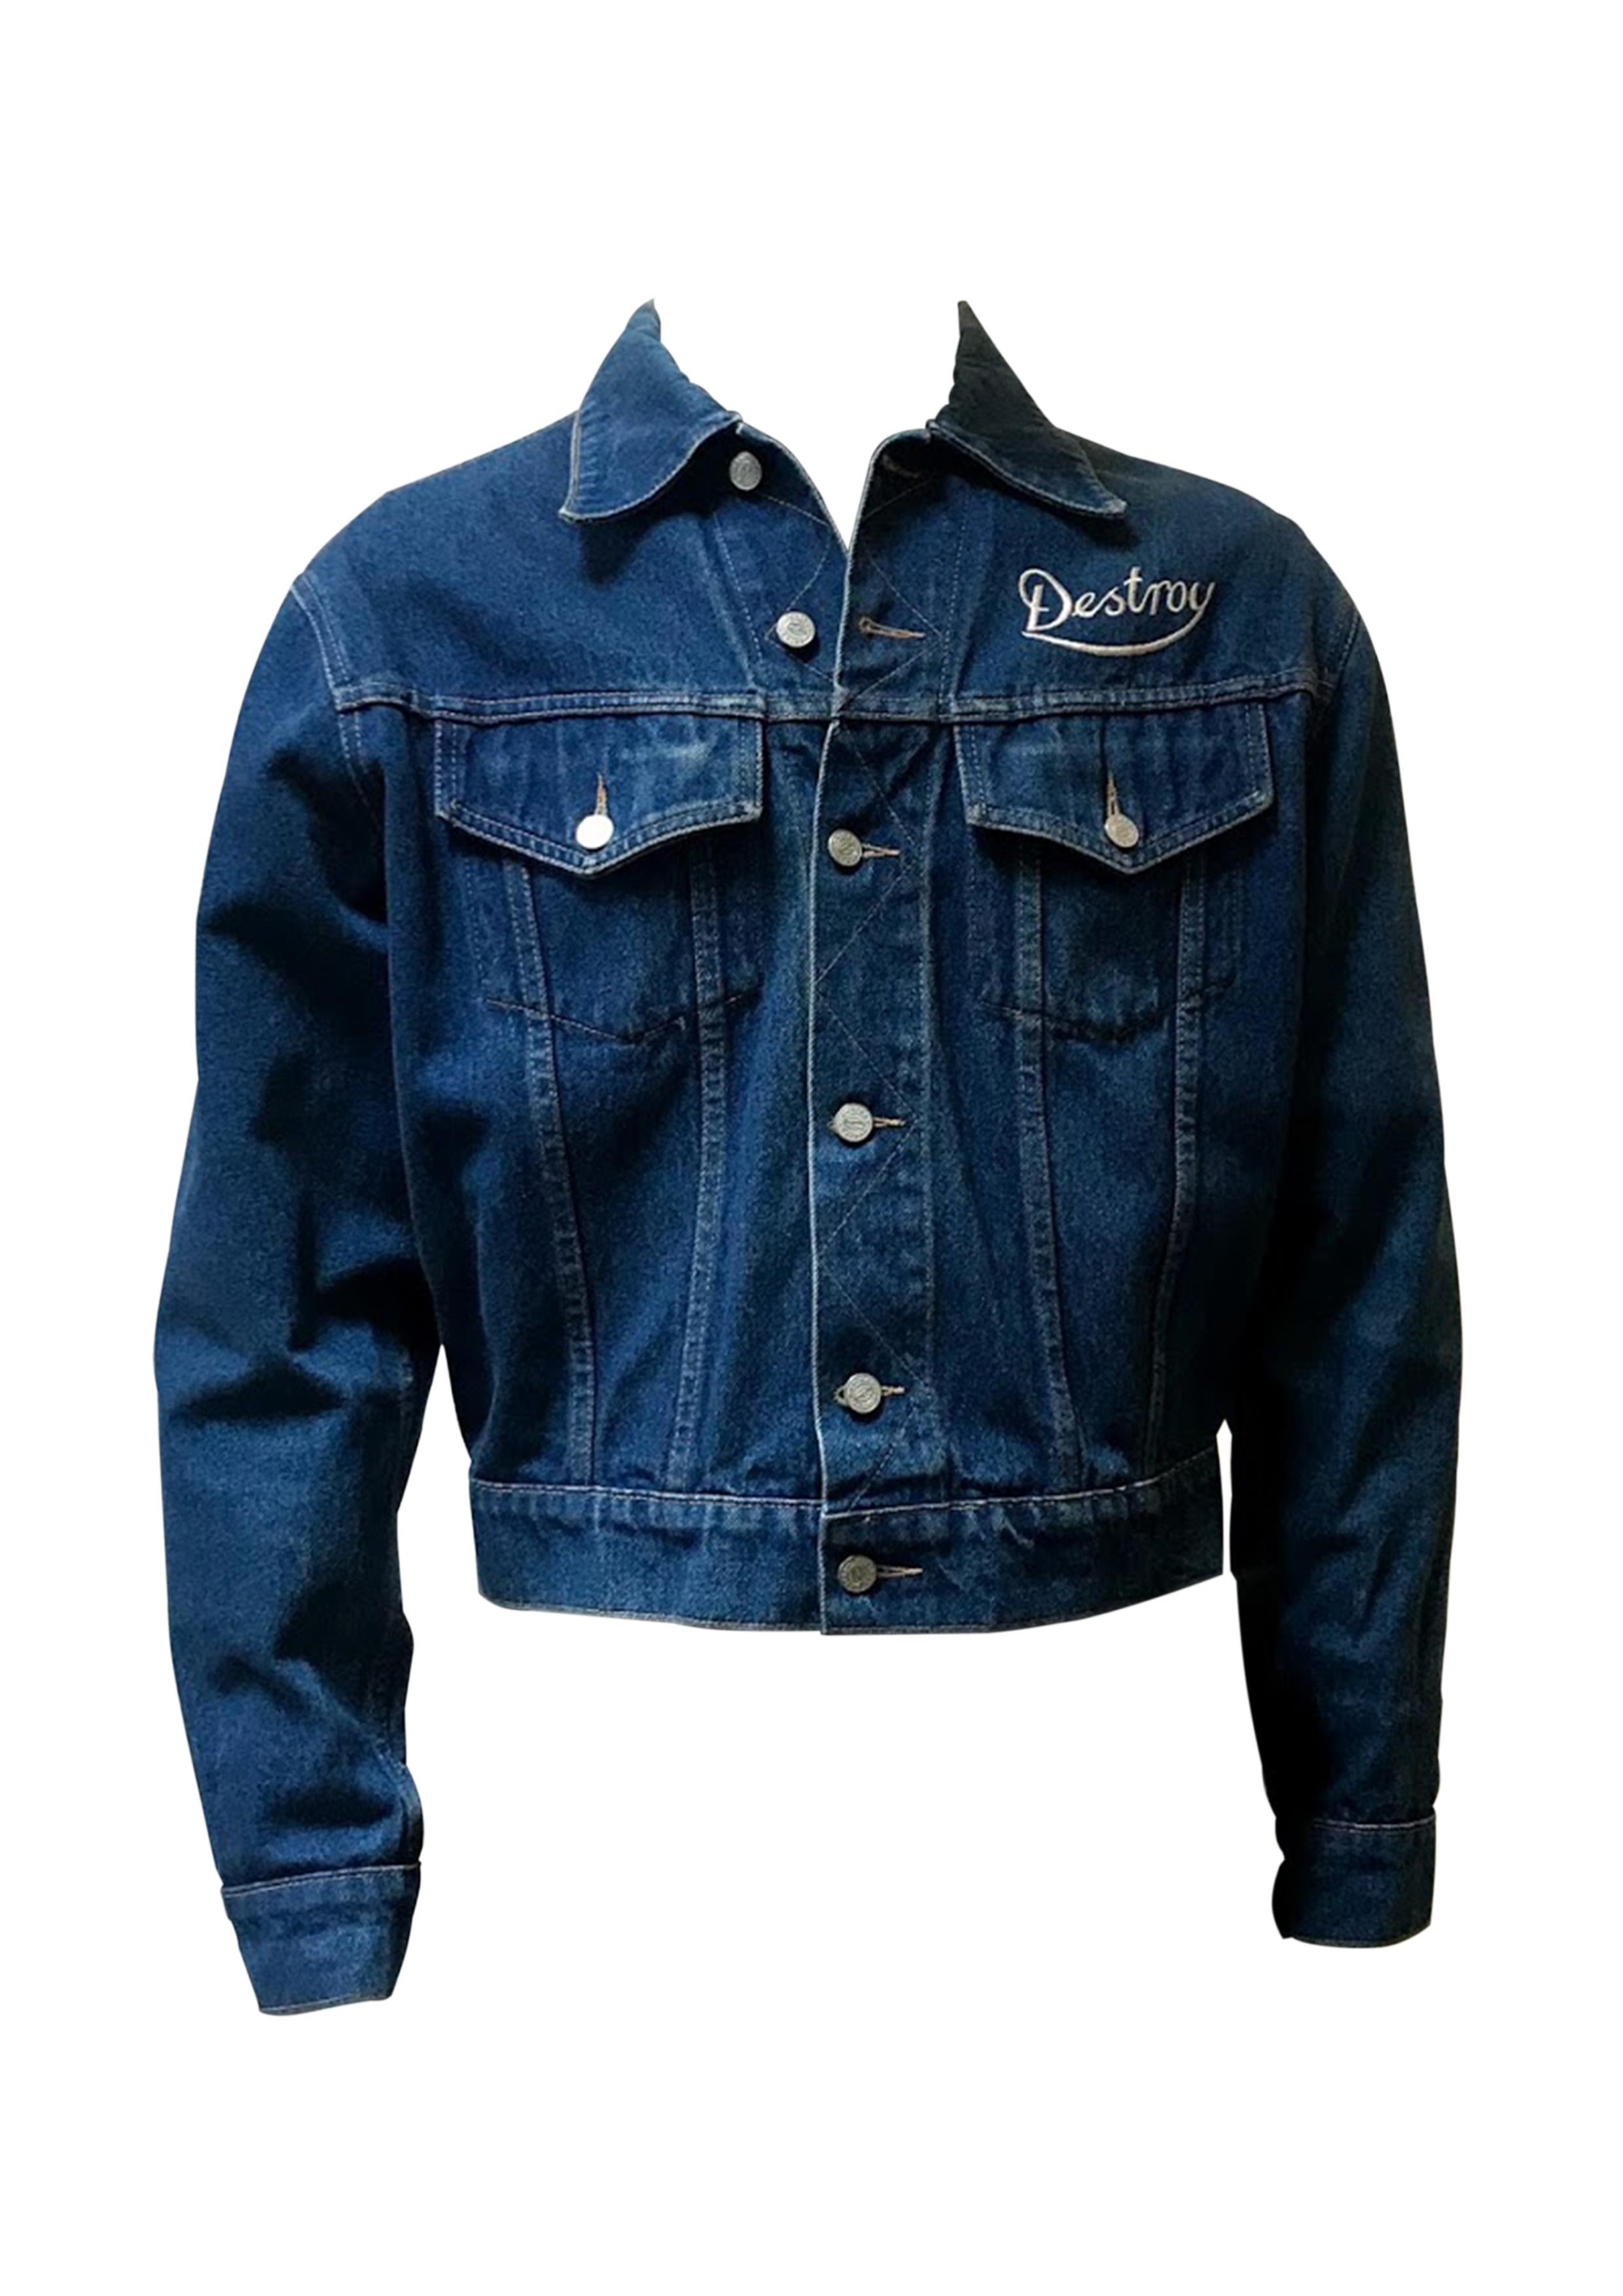 John Richmond Destroy Collection Nomad Denim Jacket made in Italy from denim and leather.

John Richmond is labelled by many as a rock n roll designer and his brand is loved by some of the biggest names in music. You'll instantly recognise the